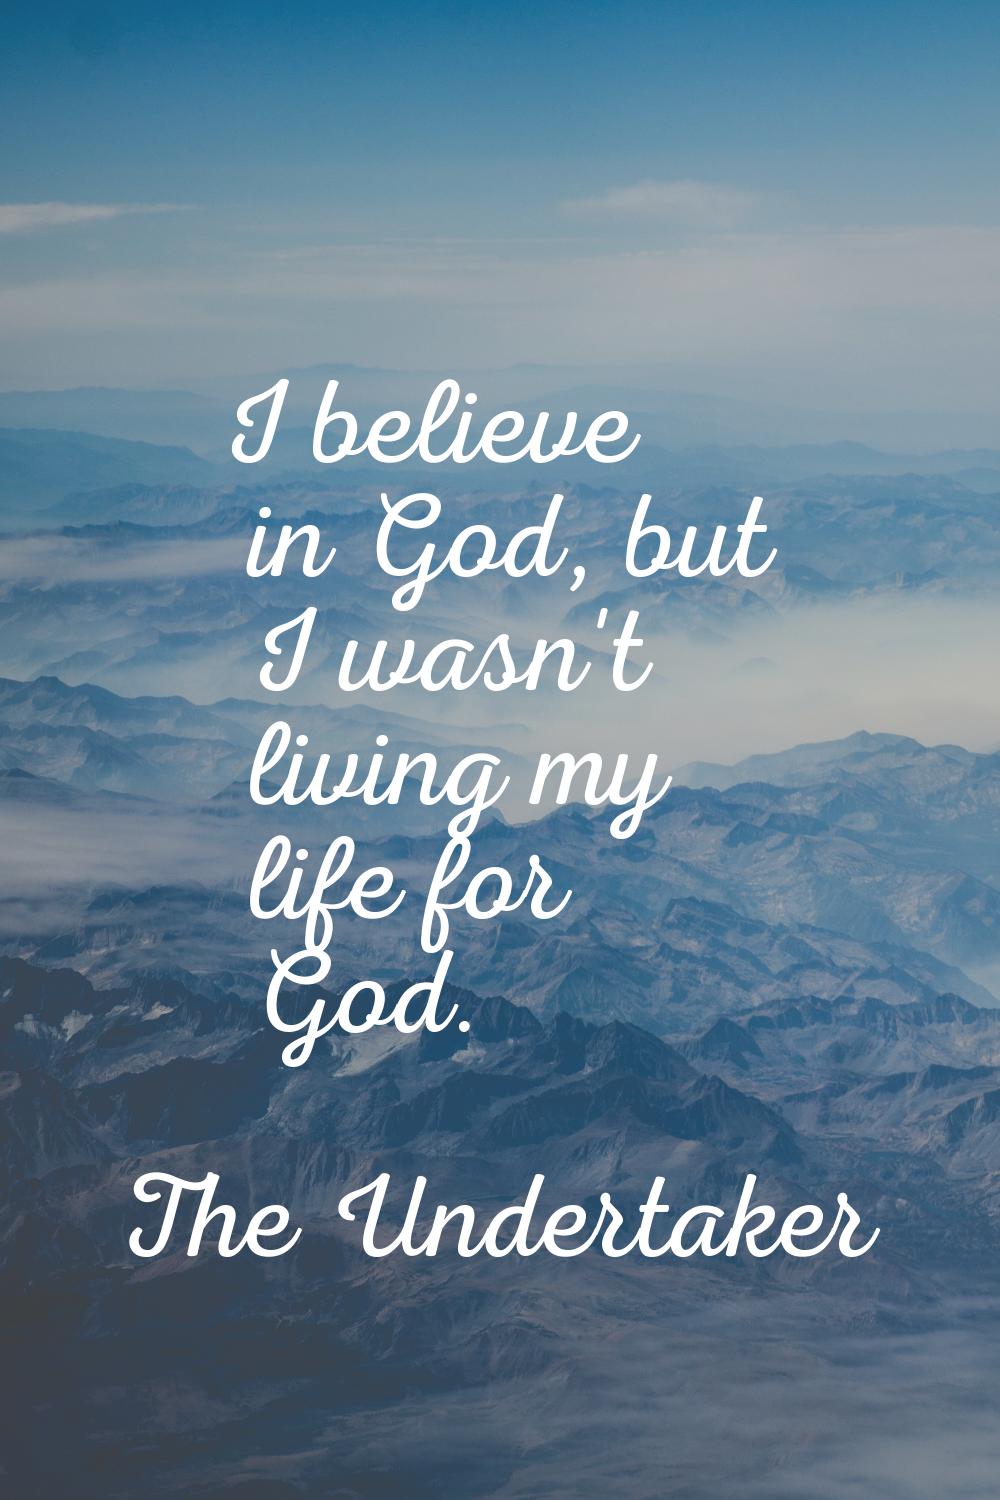 I believe in God, but I wasn't living my life for God.